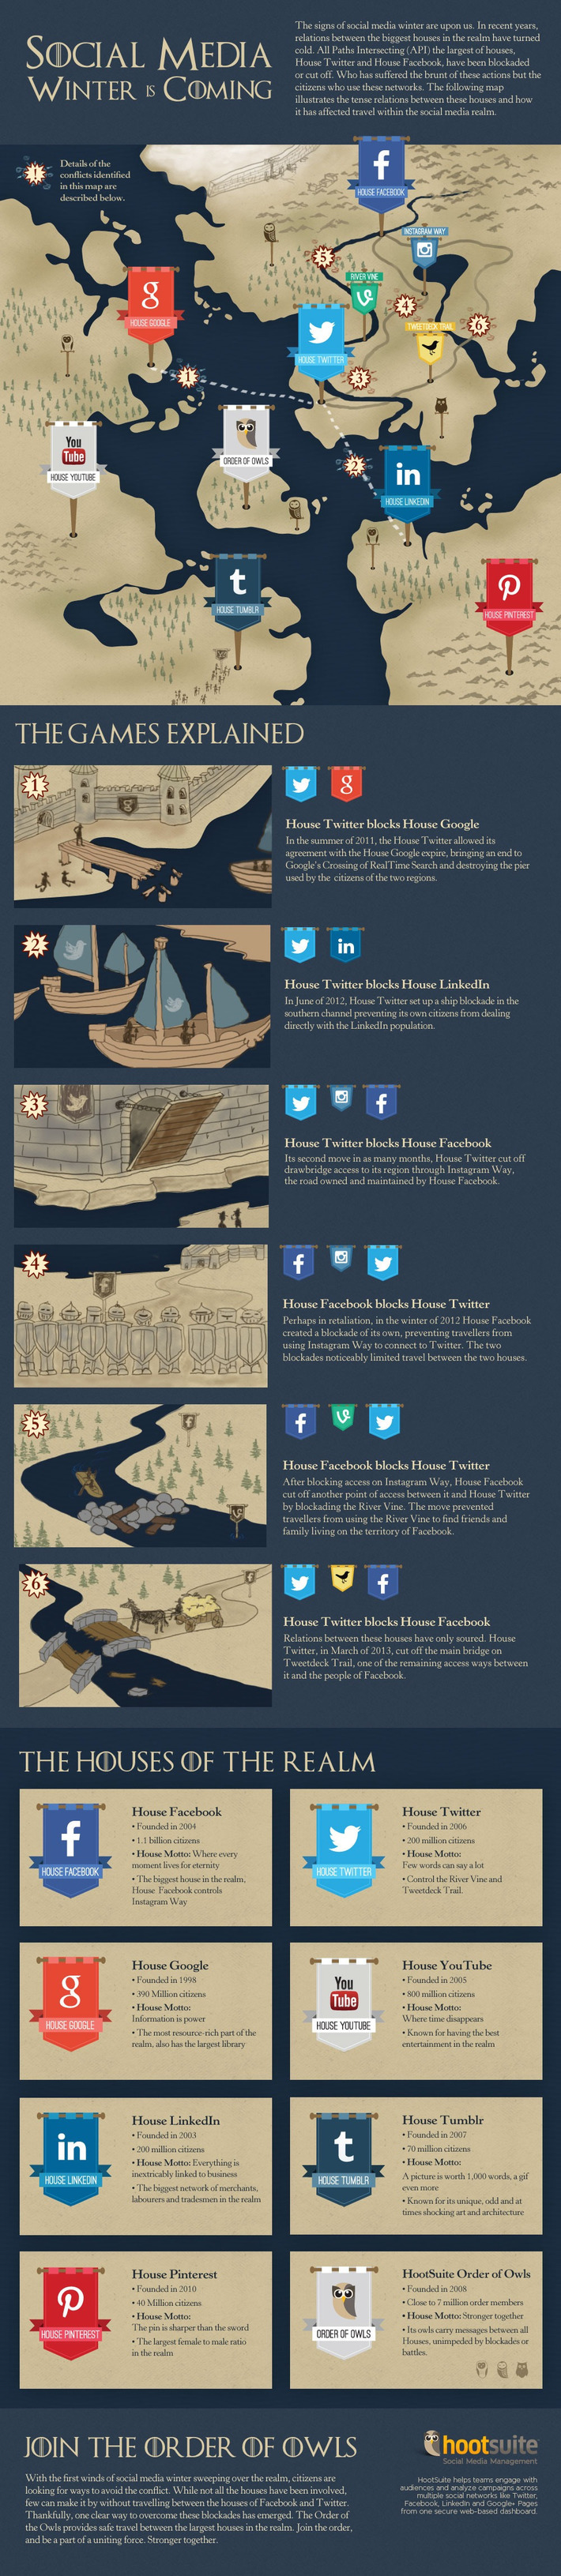 Social Media Wars Told in 'Game of Thrones' Style [INFOGRAPHIC] | Machinimania | Scoop.it